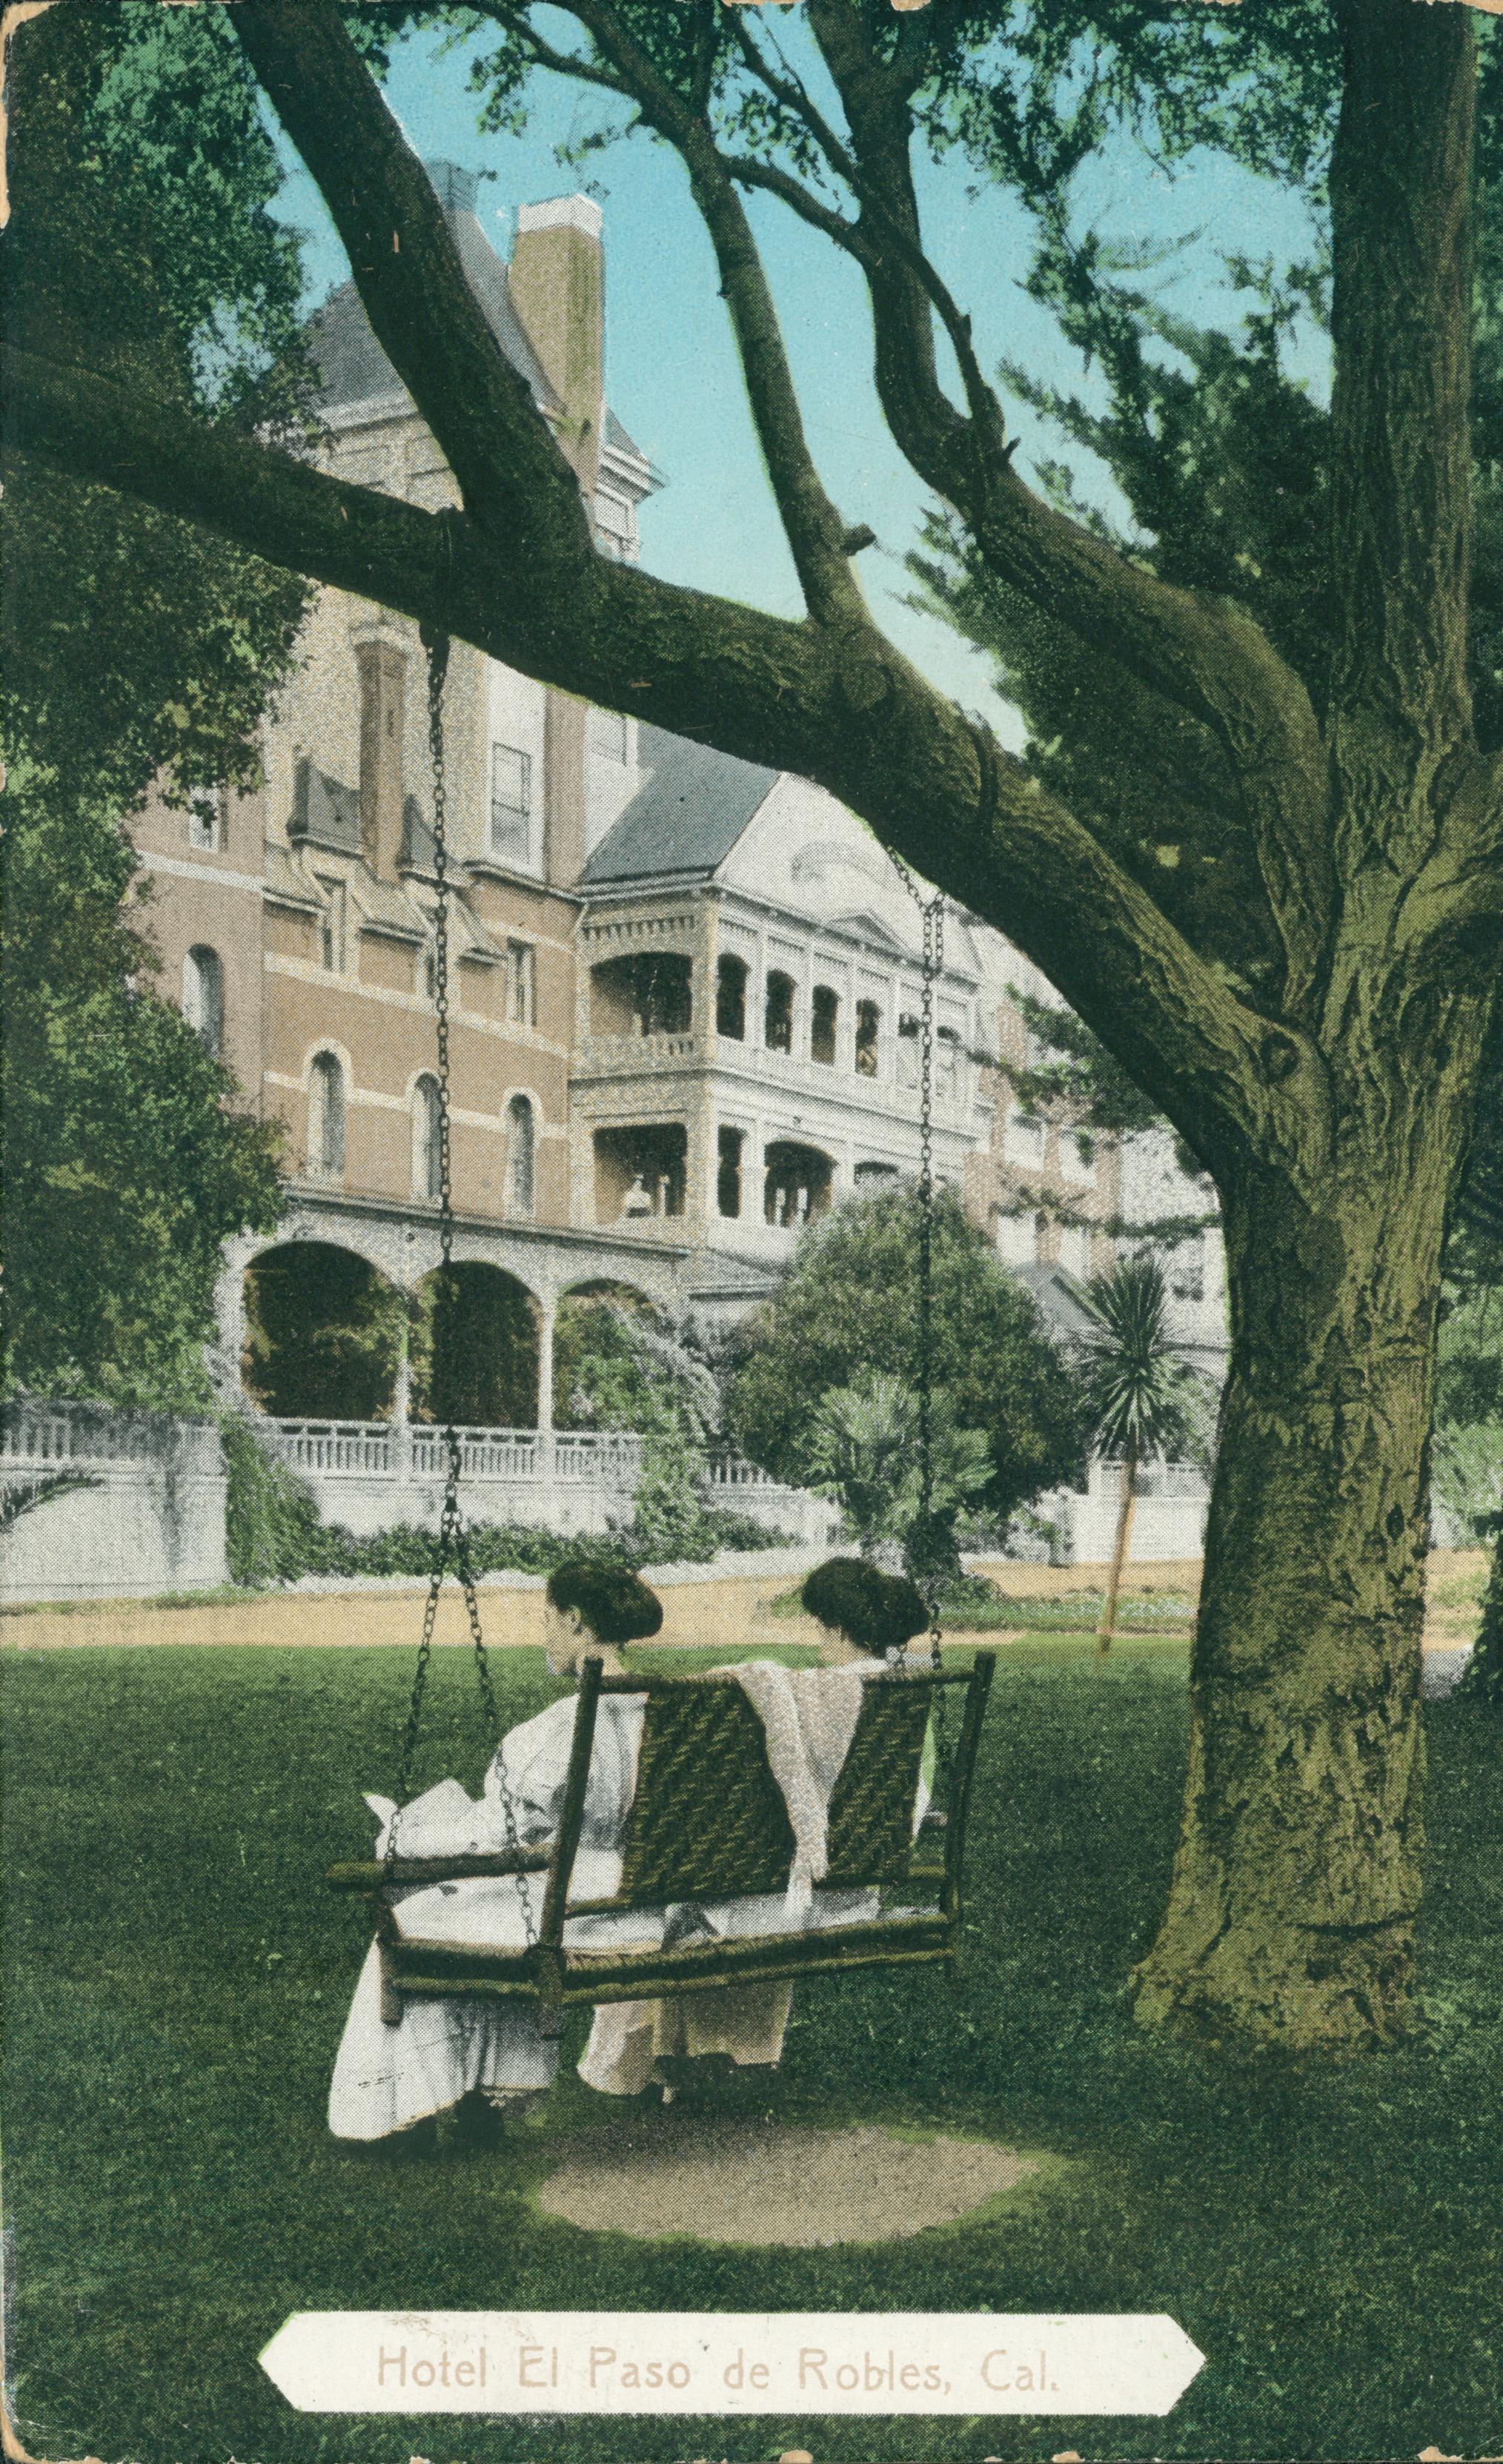 Hotel in the background, two ladies rocking in a tree swing hanging from a large tree